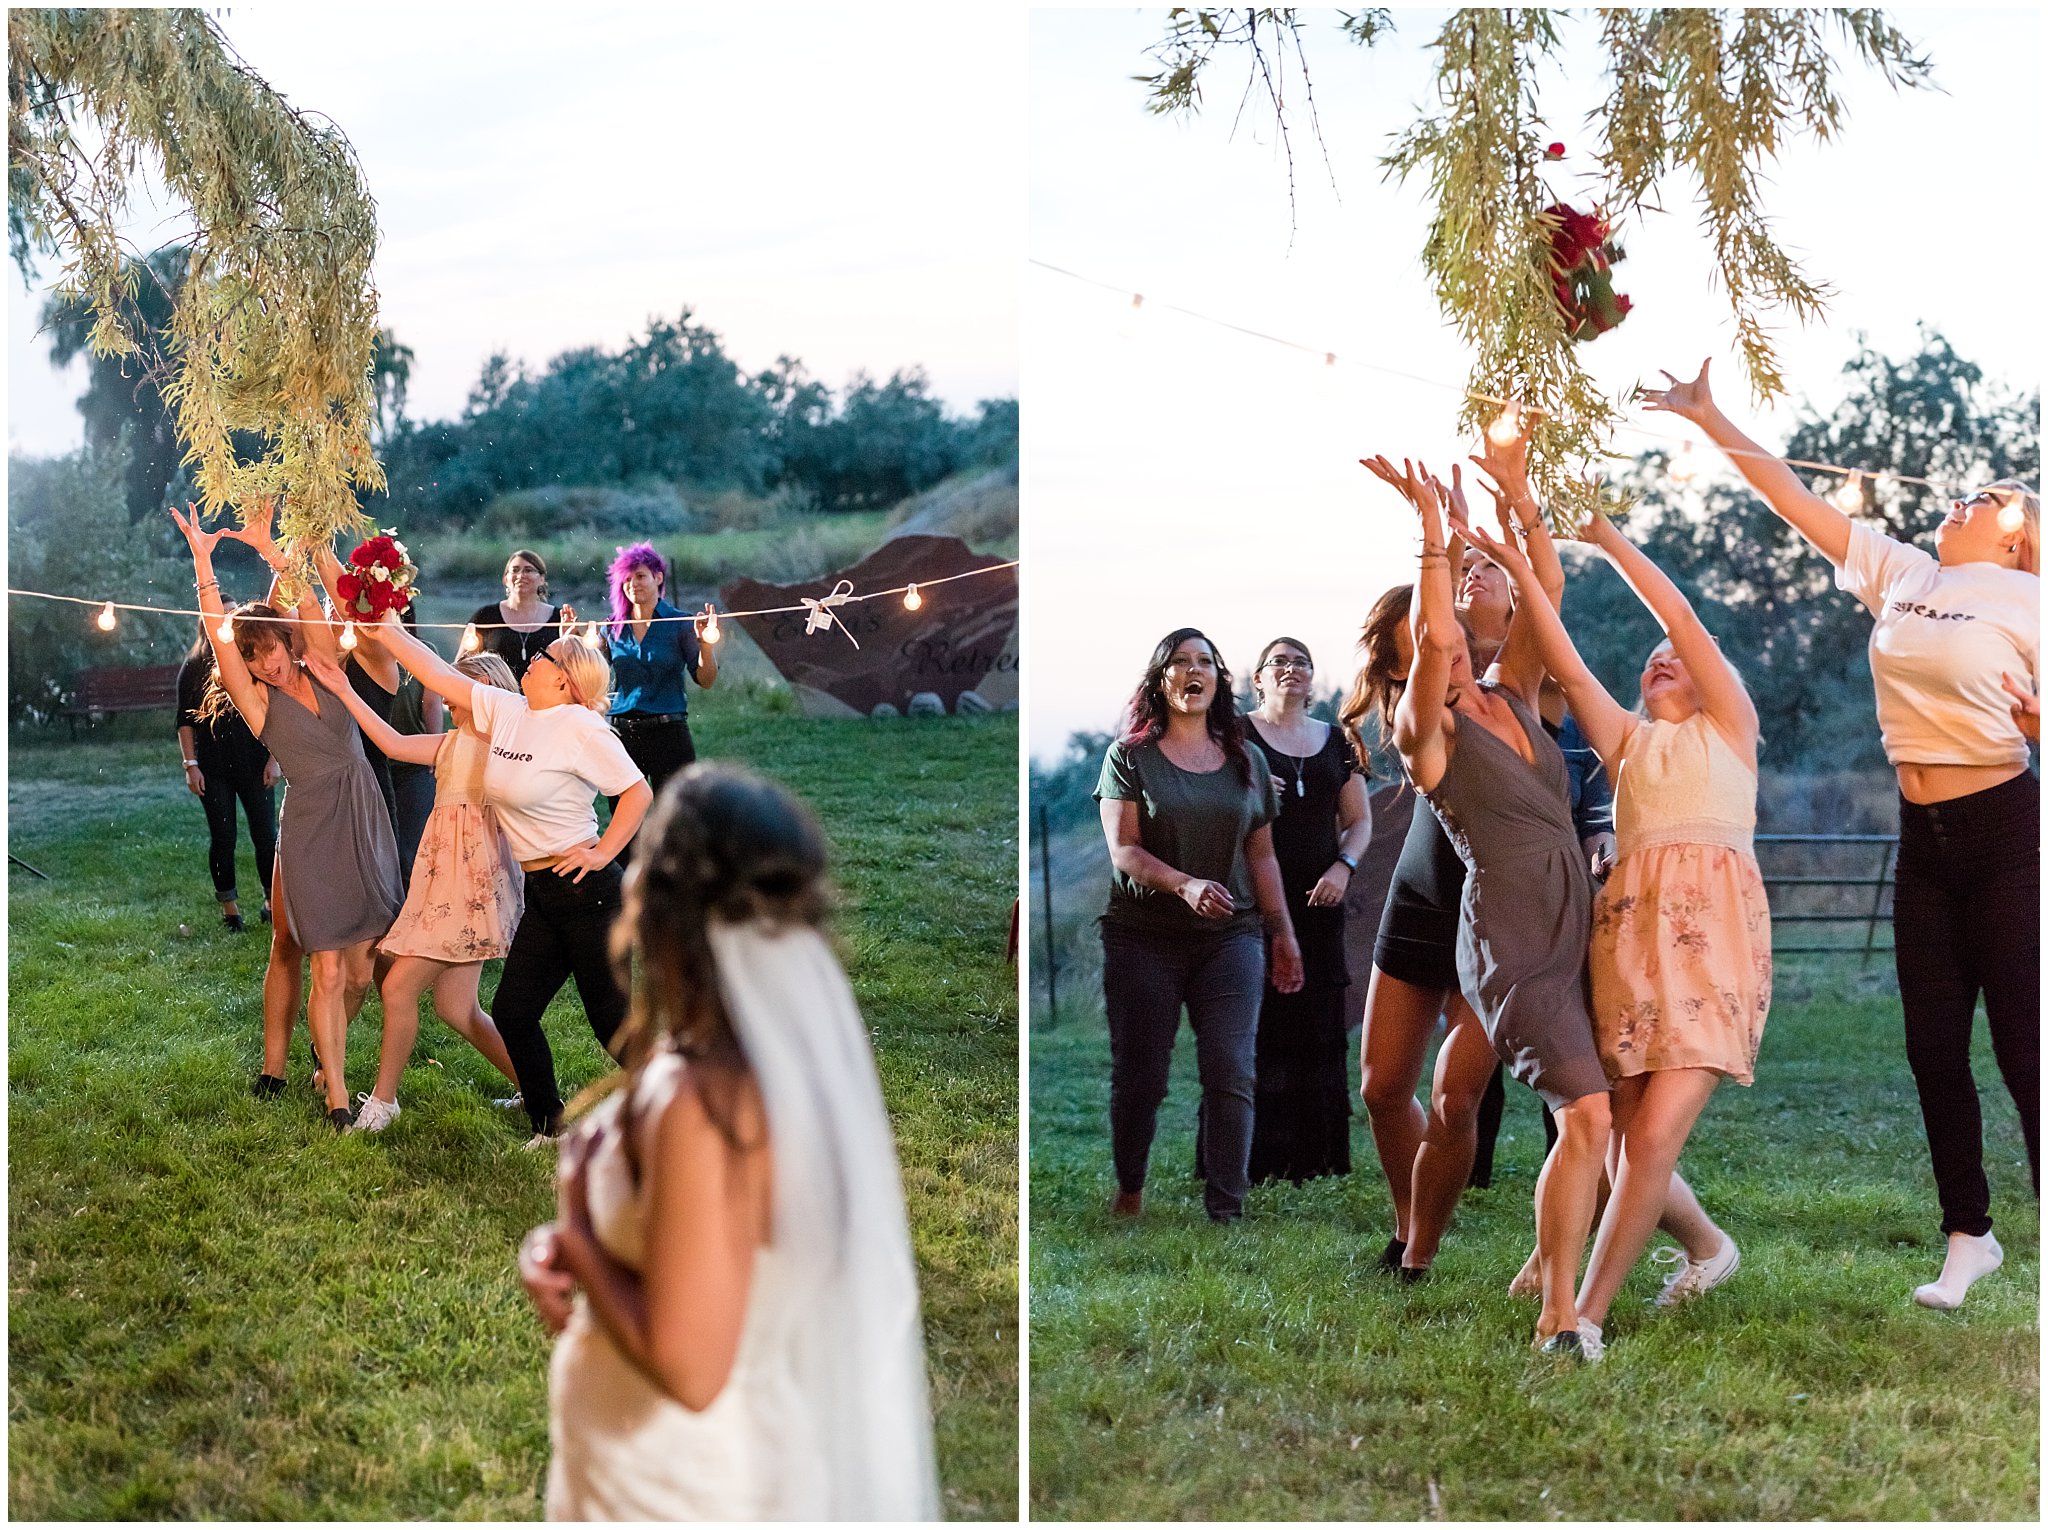 Bouquet toss and ladies jumping to catch it | Red and Grey wedding | Davis County Outdoor Wedding | Jessie and Dallin Photography